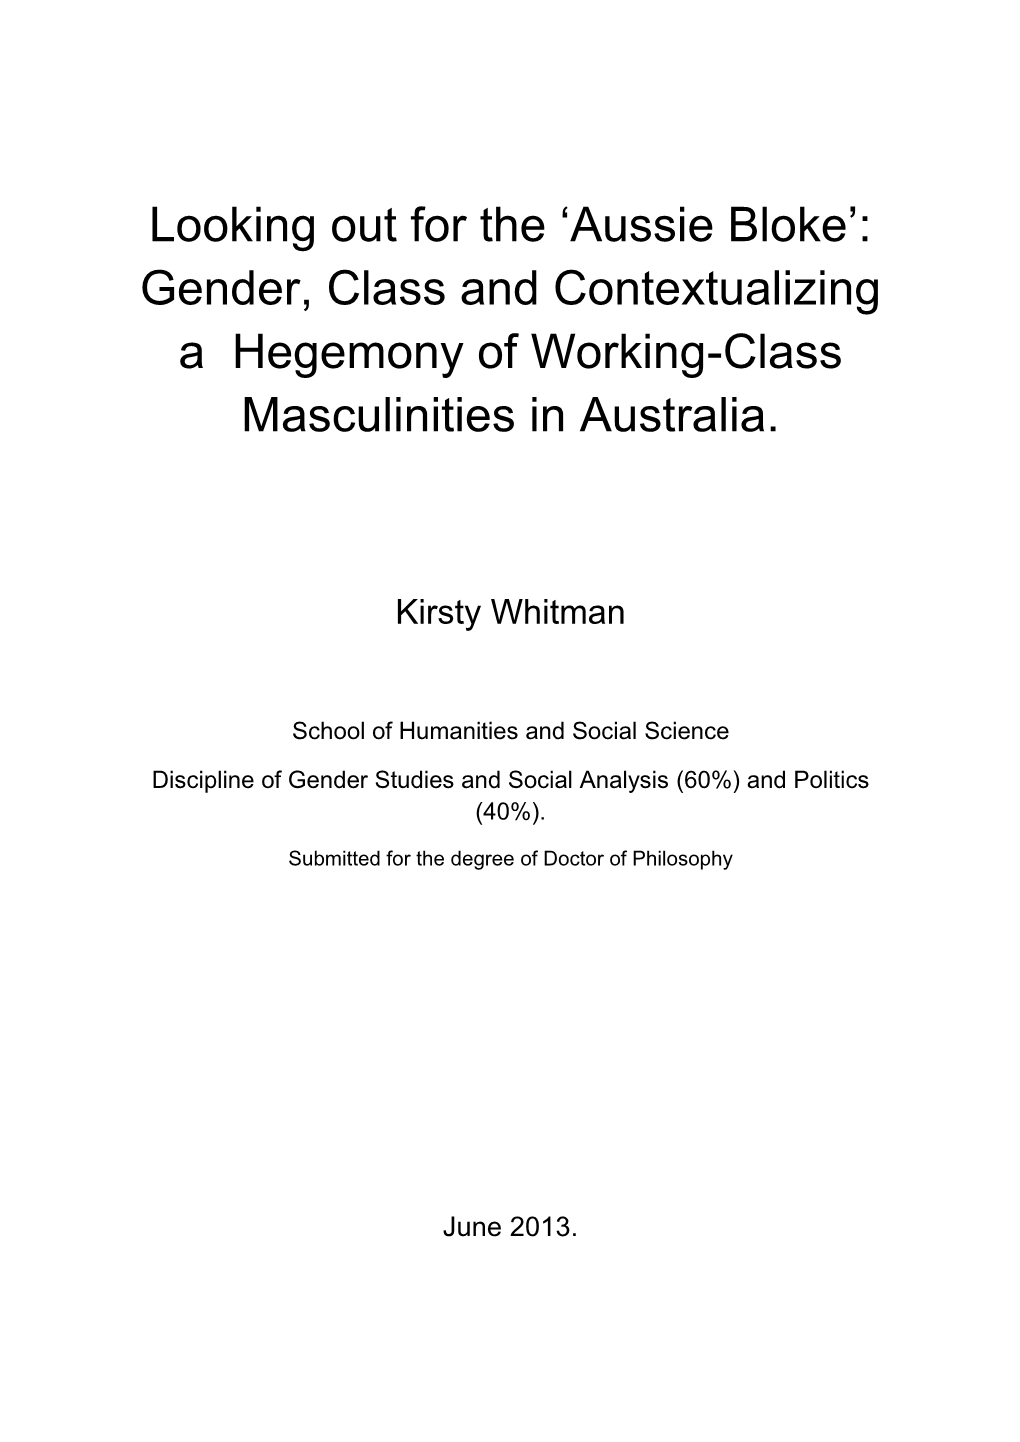 'Aussie Bloke': Gender, Class and Contextualizing a Hegemony Of